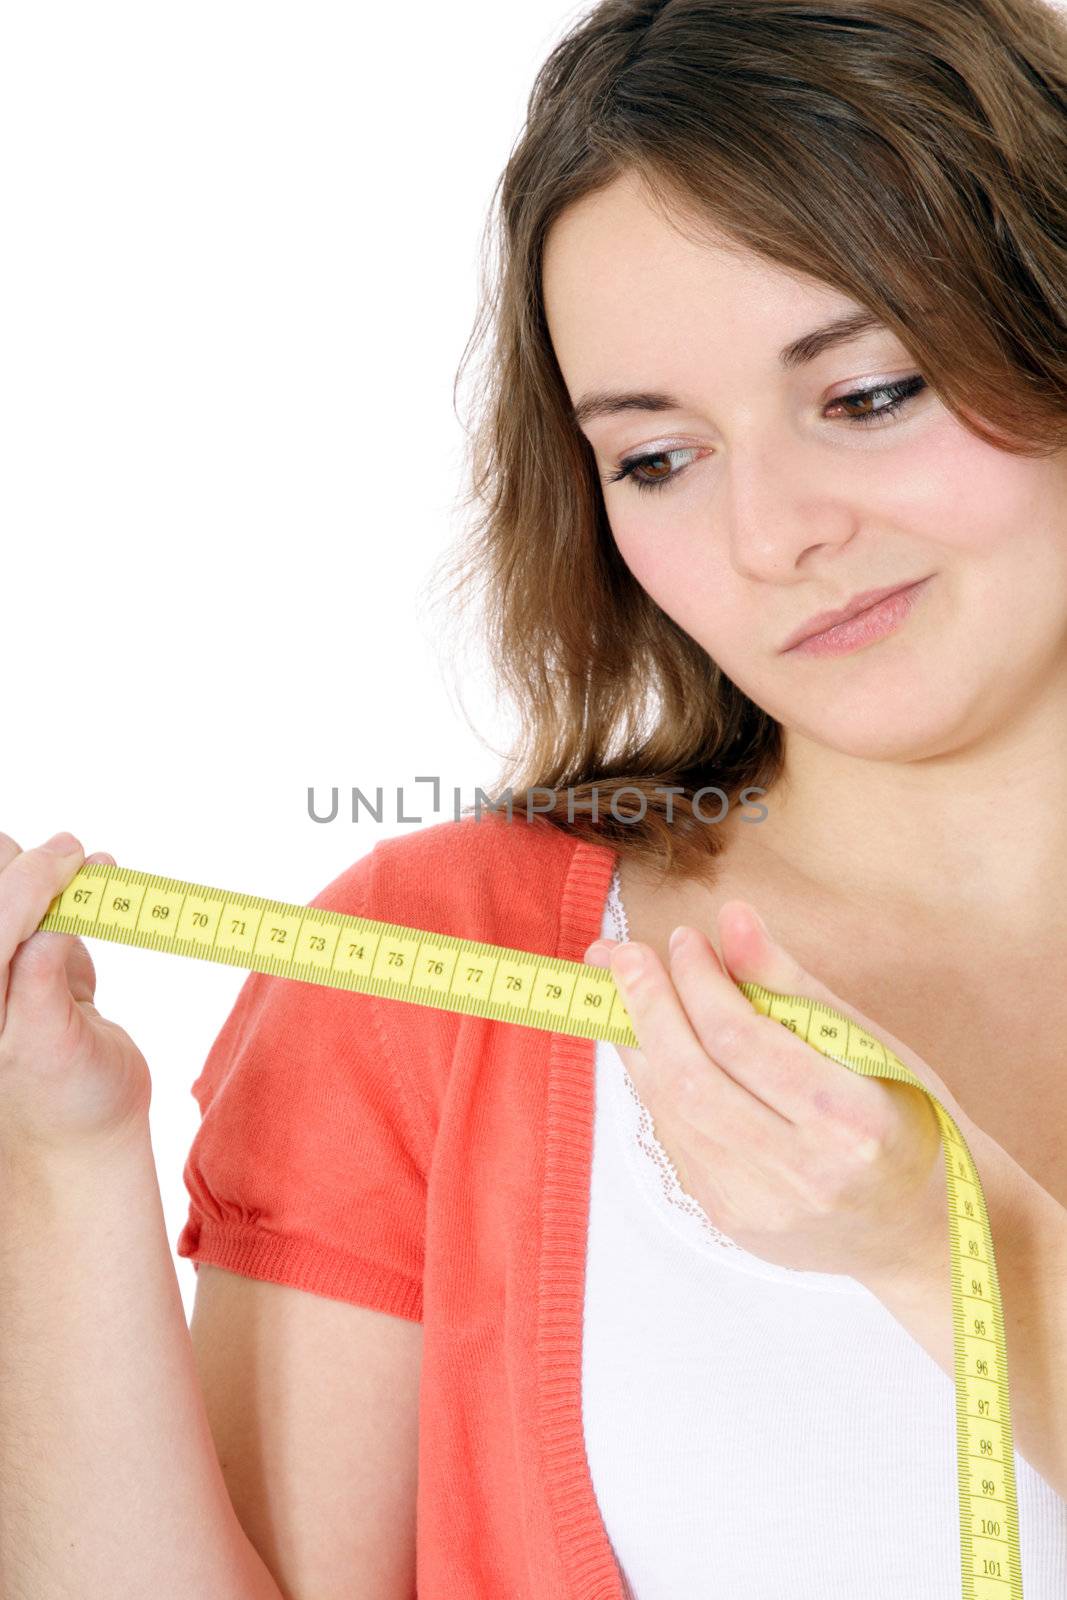 Attractive young woman looking at measuring tape. All on white background.